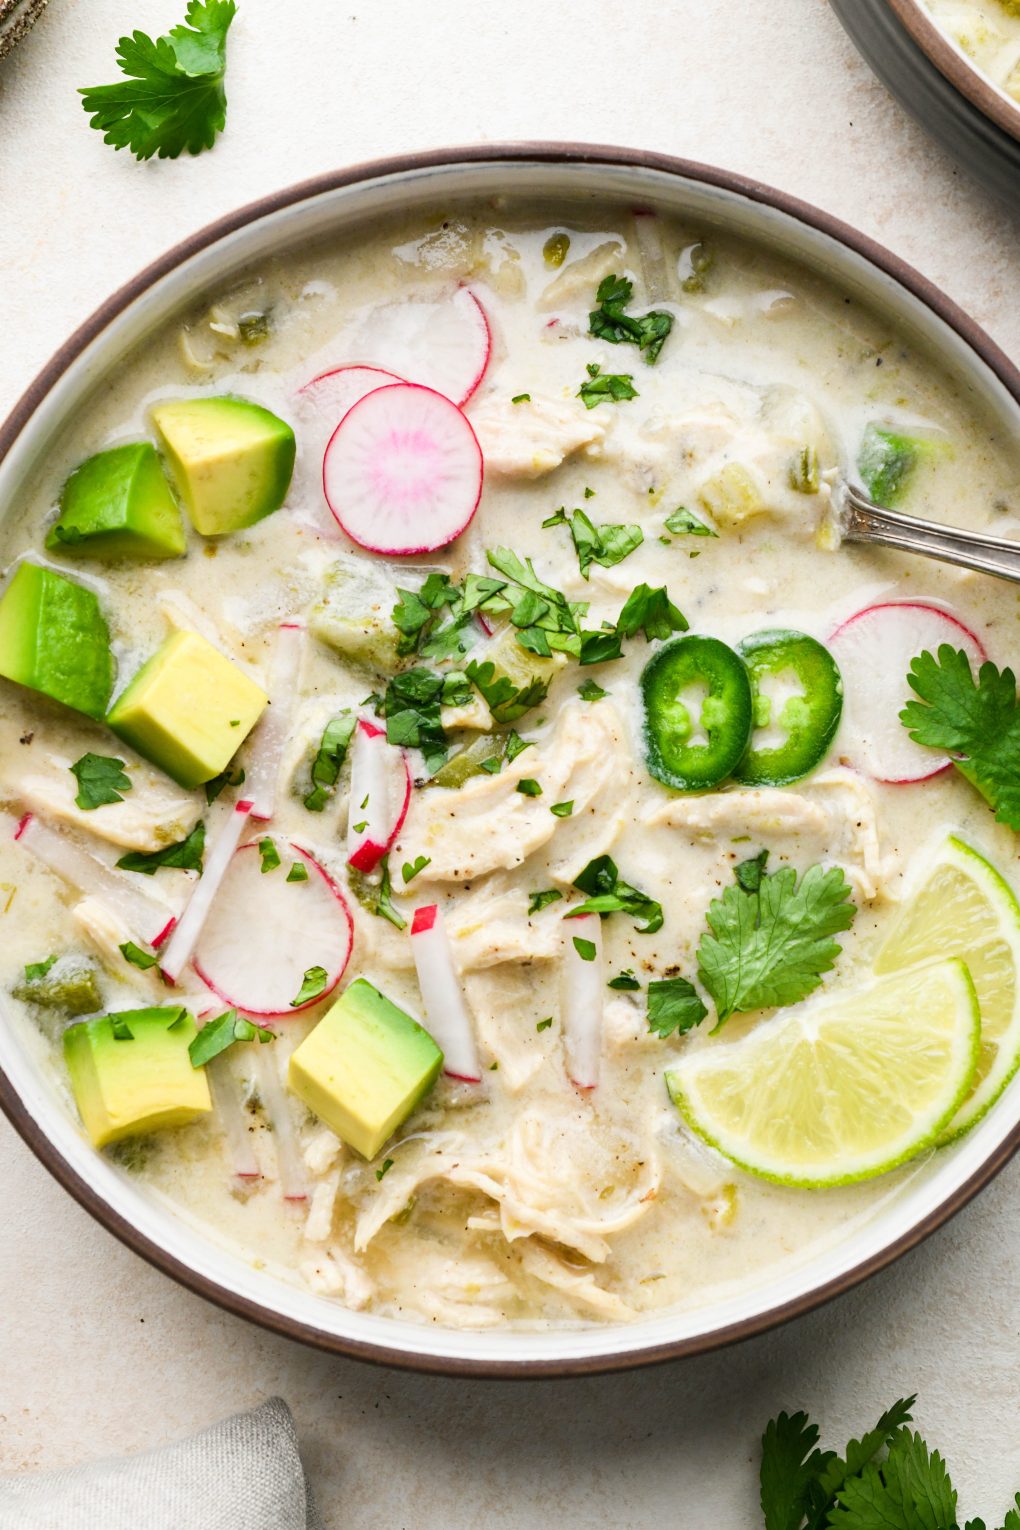 Wide bowl of creamy Whole30 white chicken chili topped with radishes, avocado, cilantro, and lime wedges. On a light cream background surrounded by some scattered herbs. 